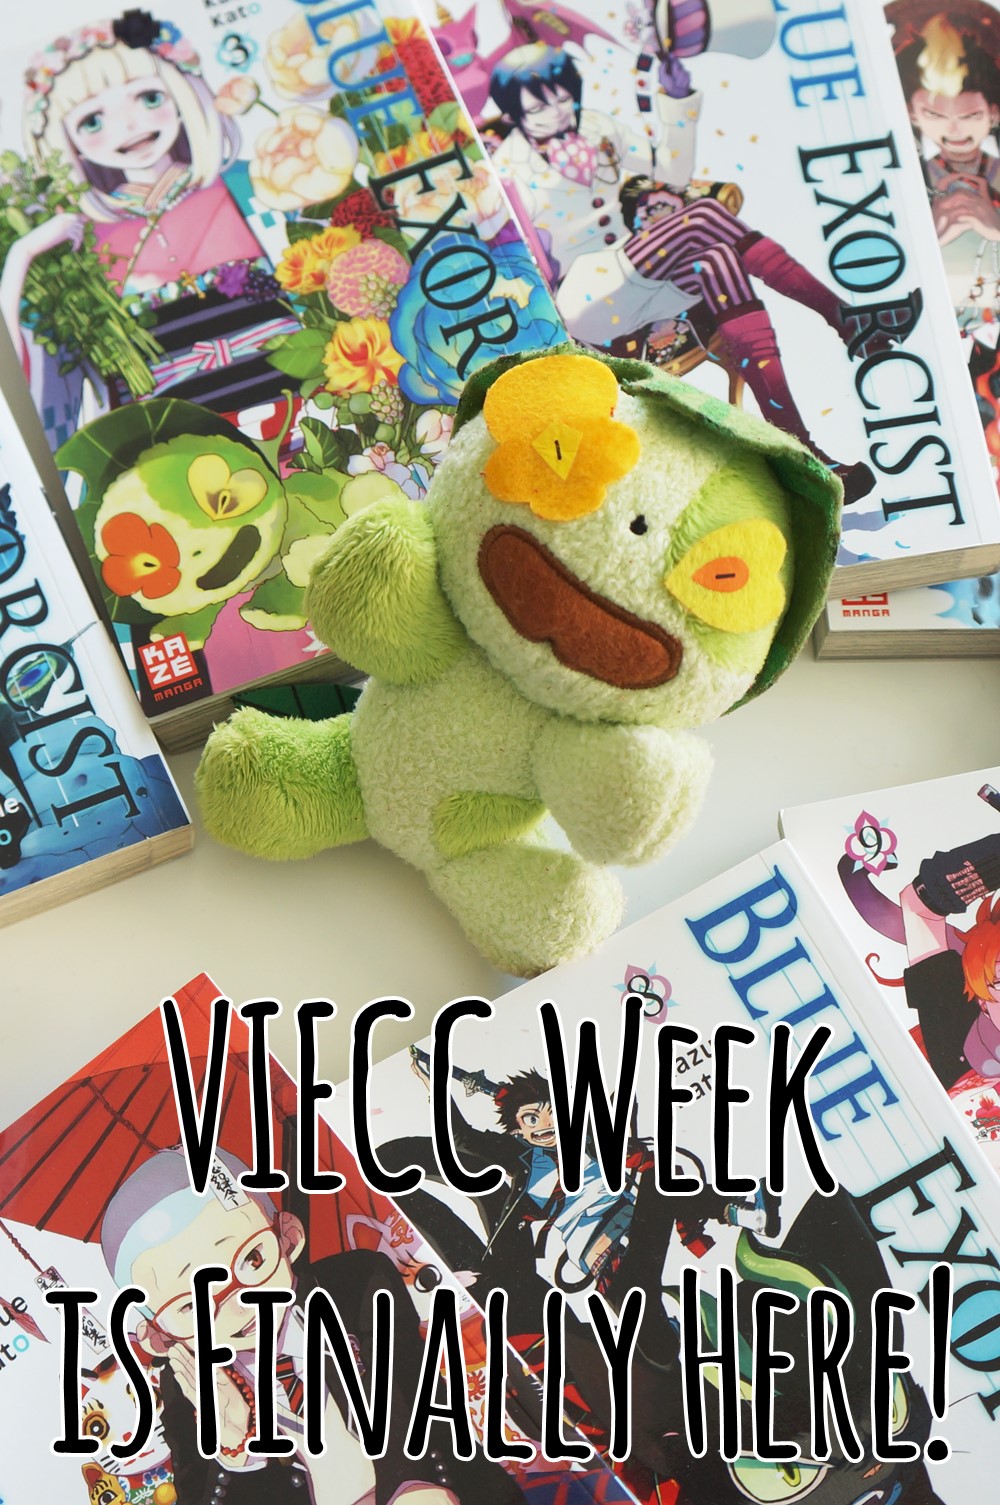 Vienna Comic Con Week is Finally Here!